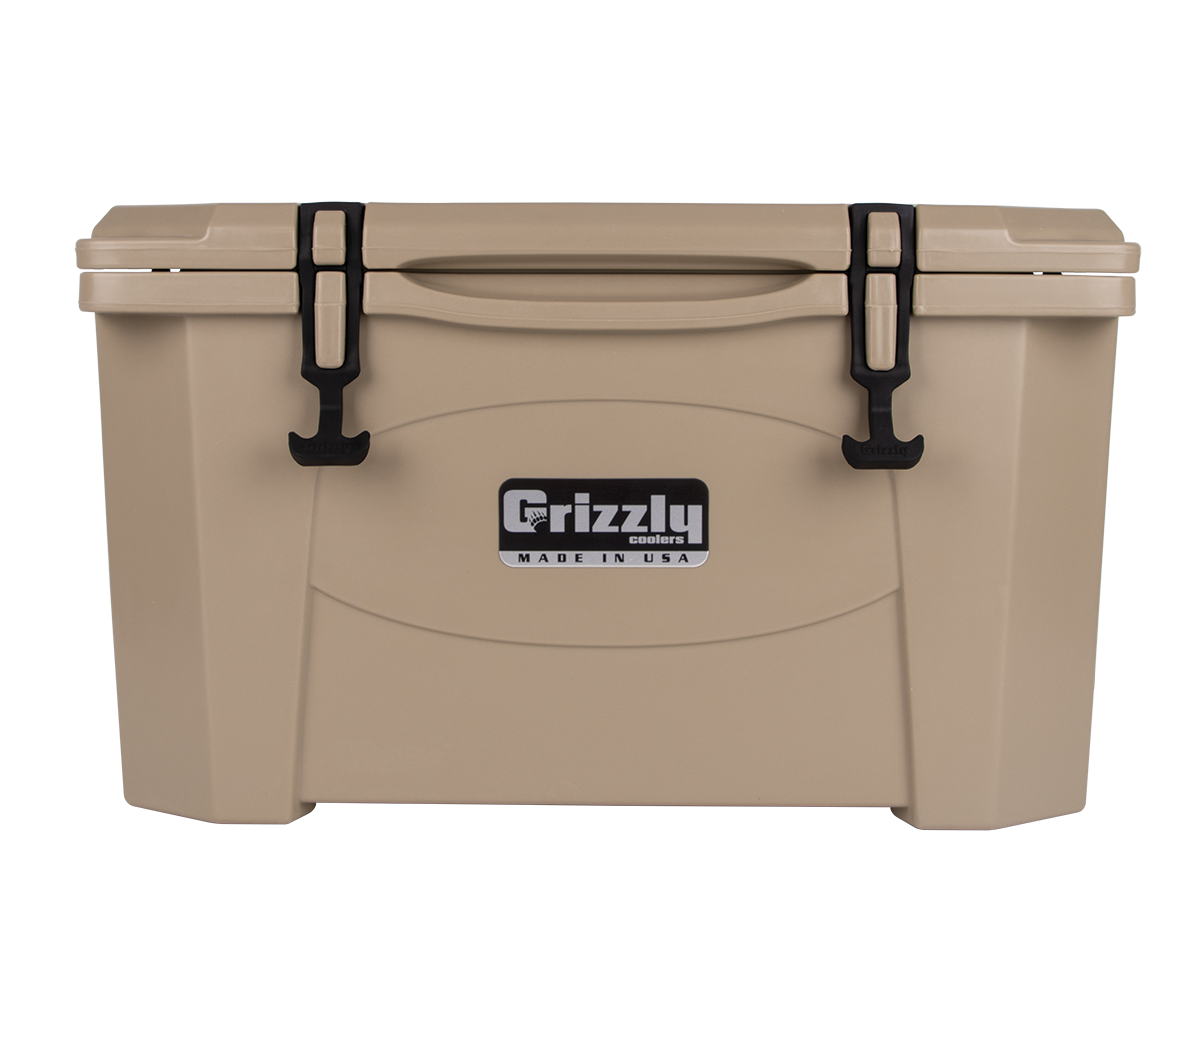 Grizzly 40 Cooler